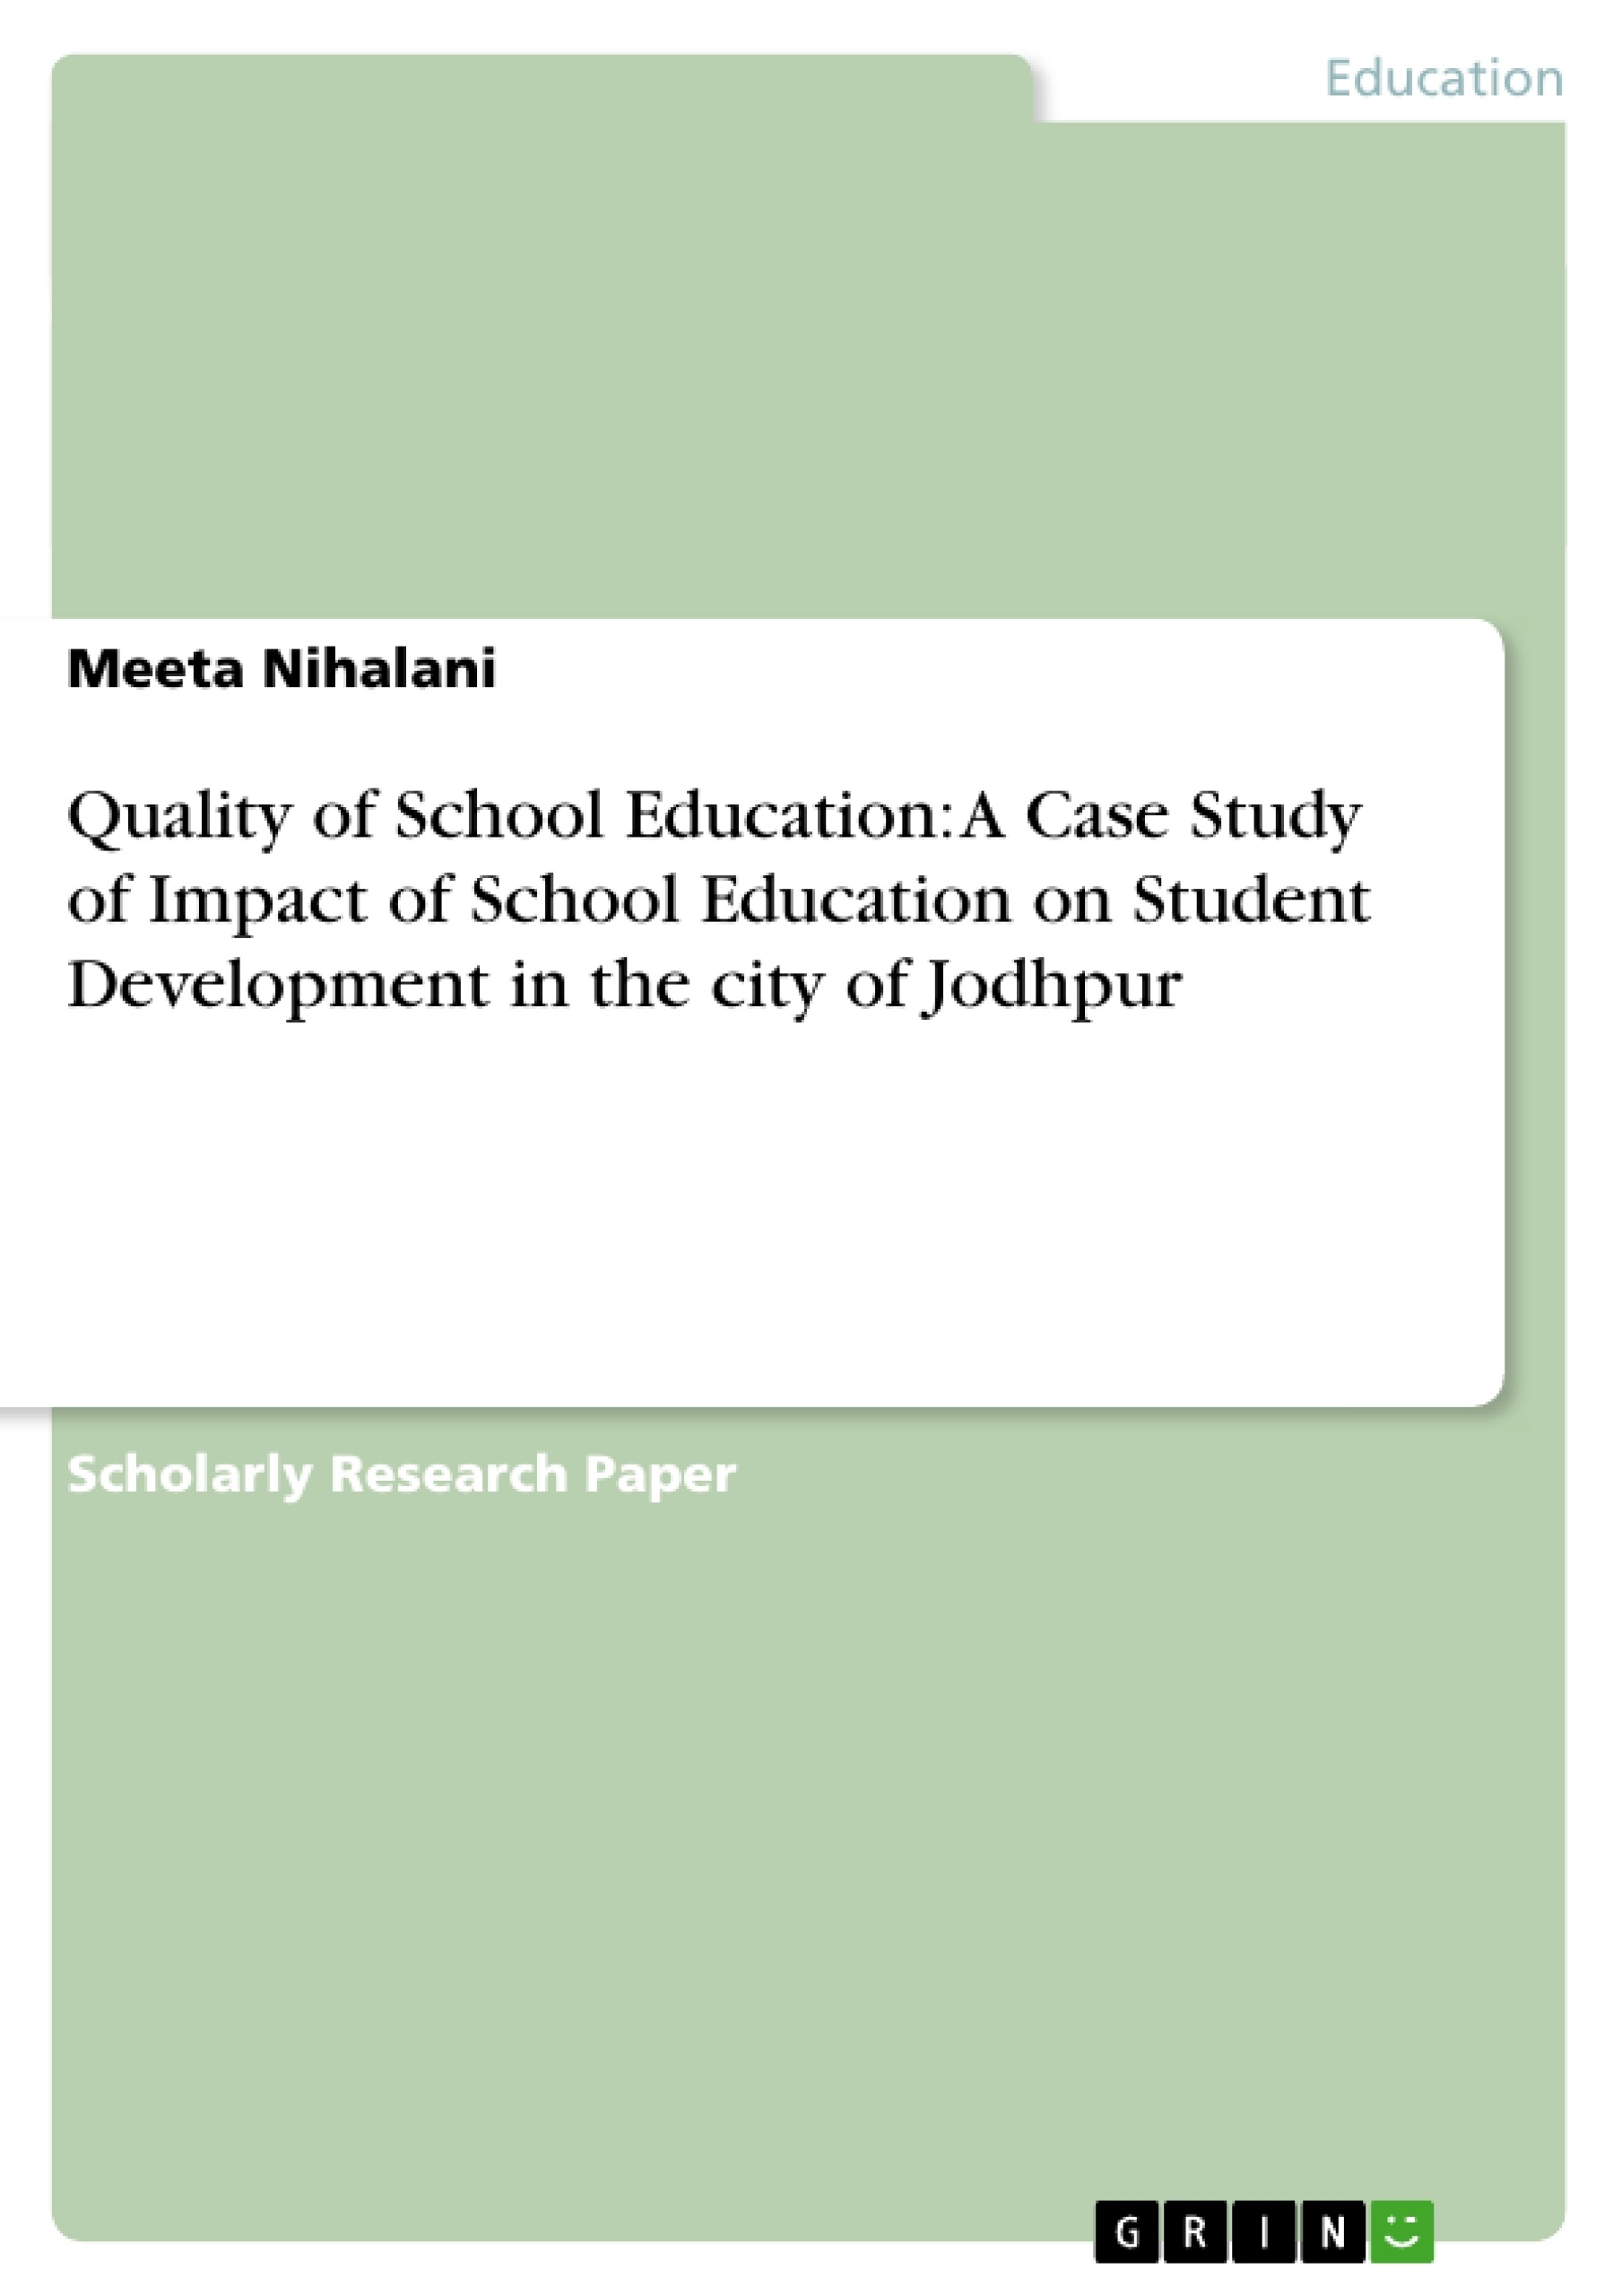 case study about quality education